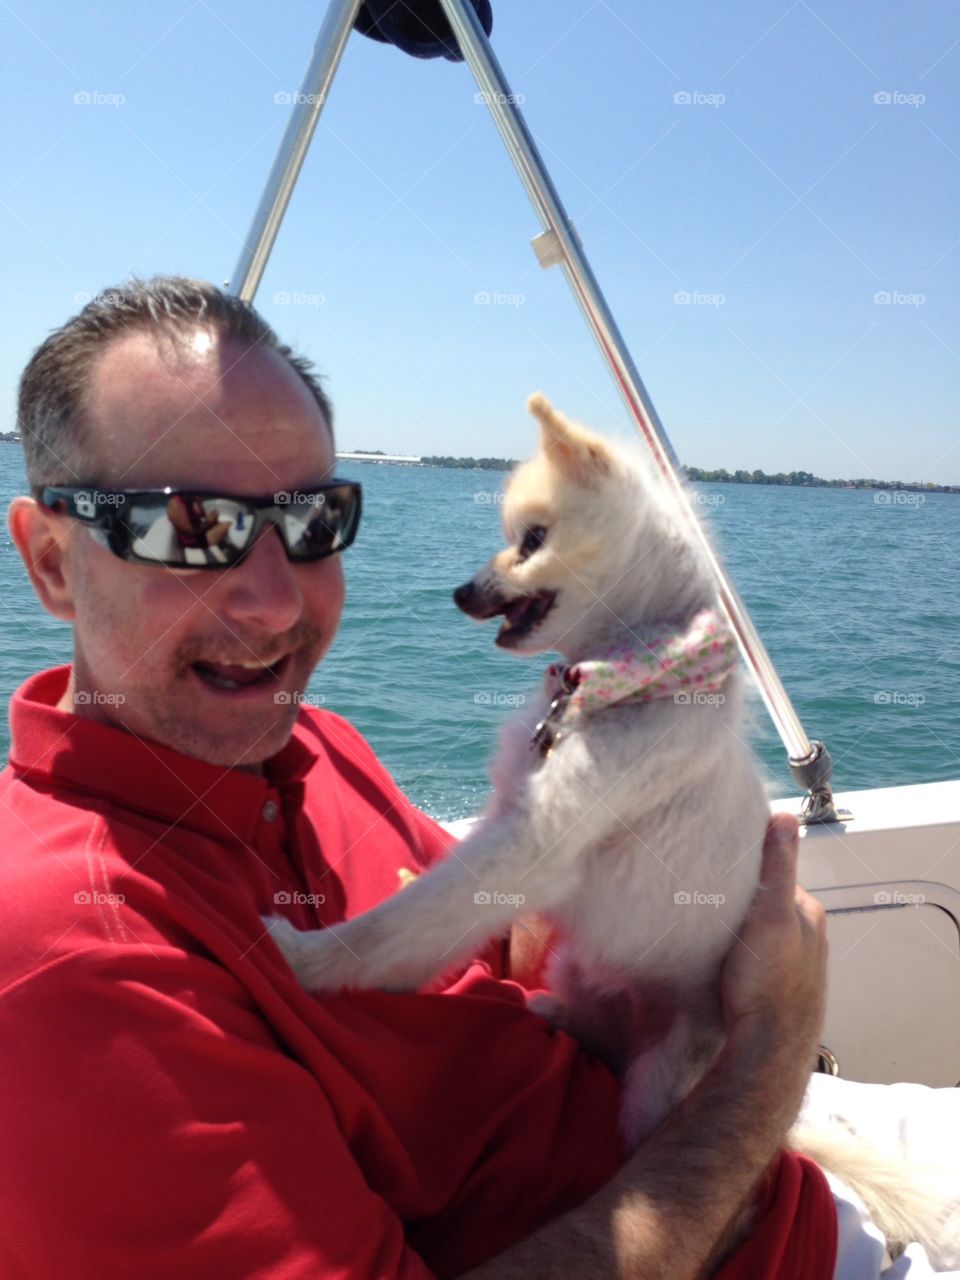 Dad with dog. This is my dad with my little adorable doggie named Fox on our boat